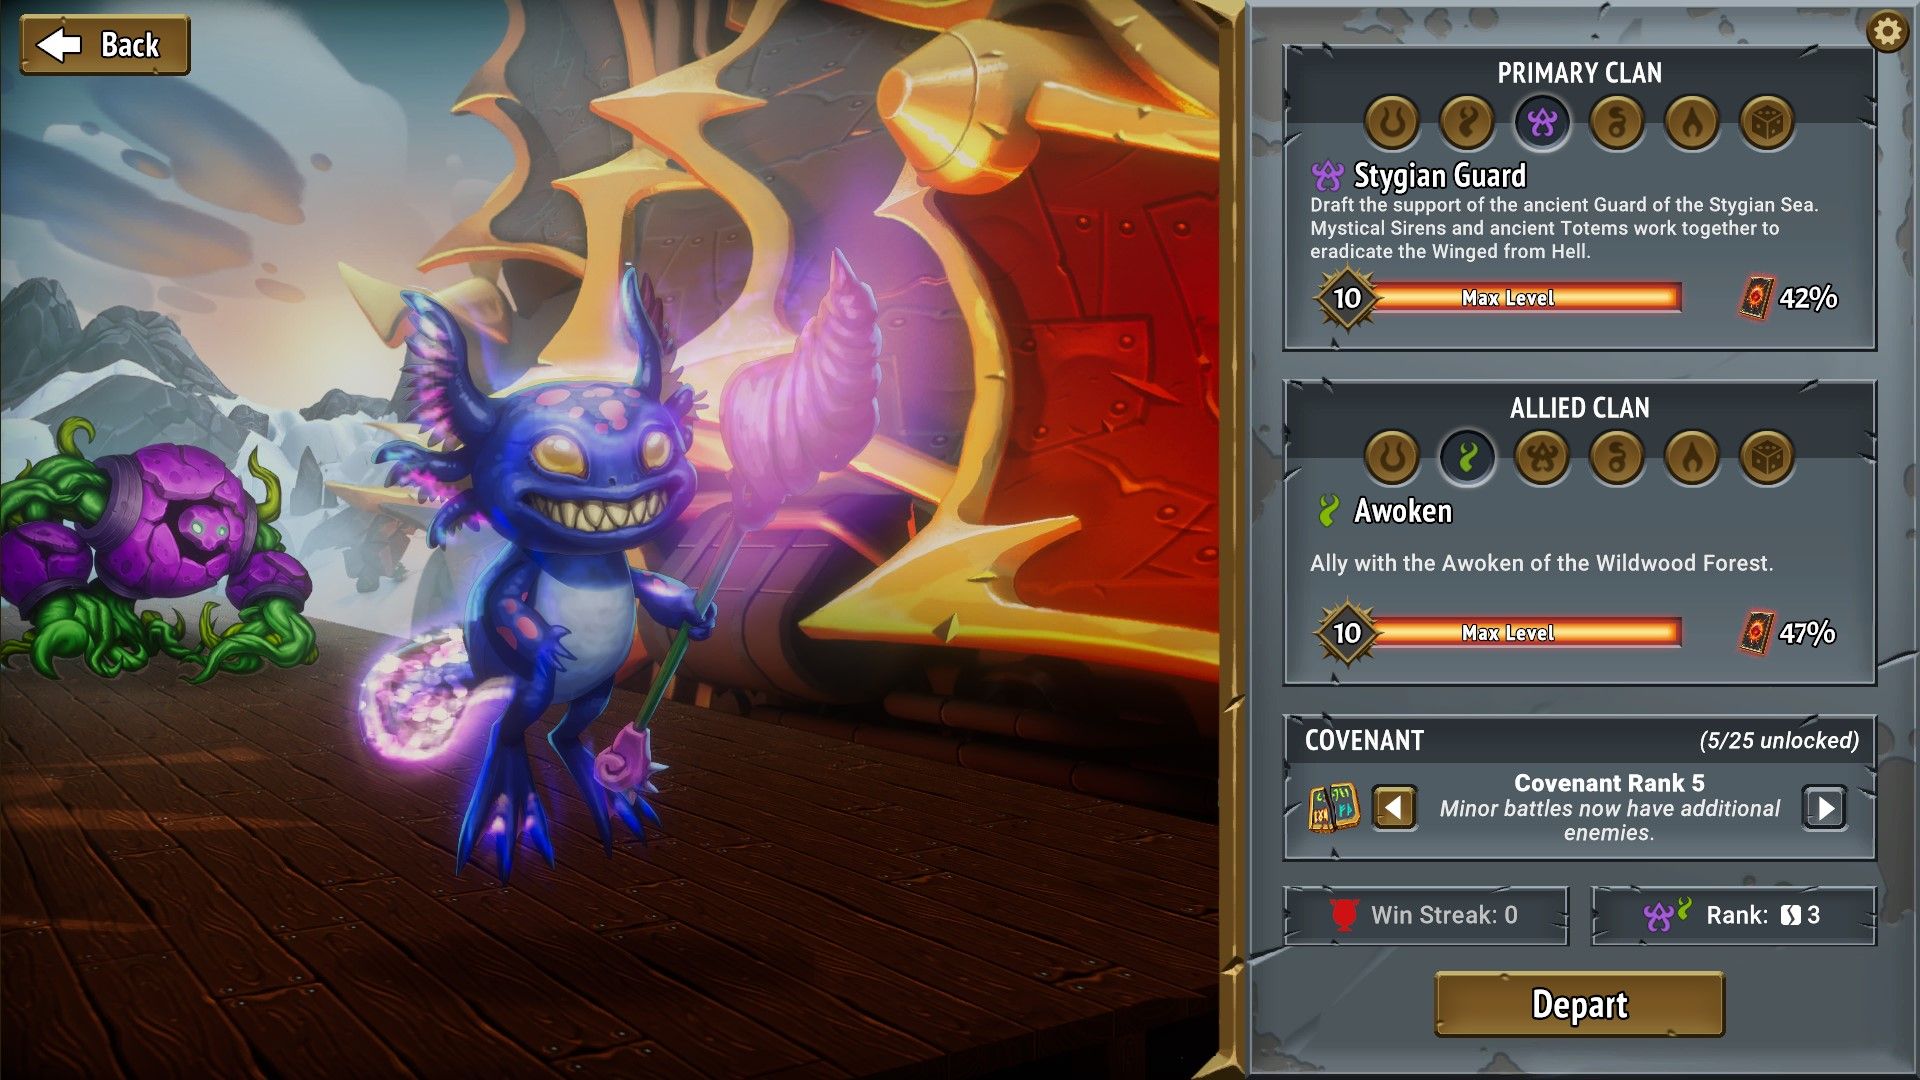 Monster Train May Have Dethroned Slay The Spire As The DeckBuilding King